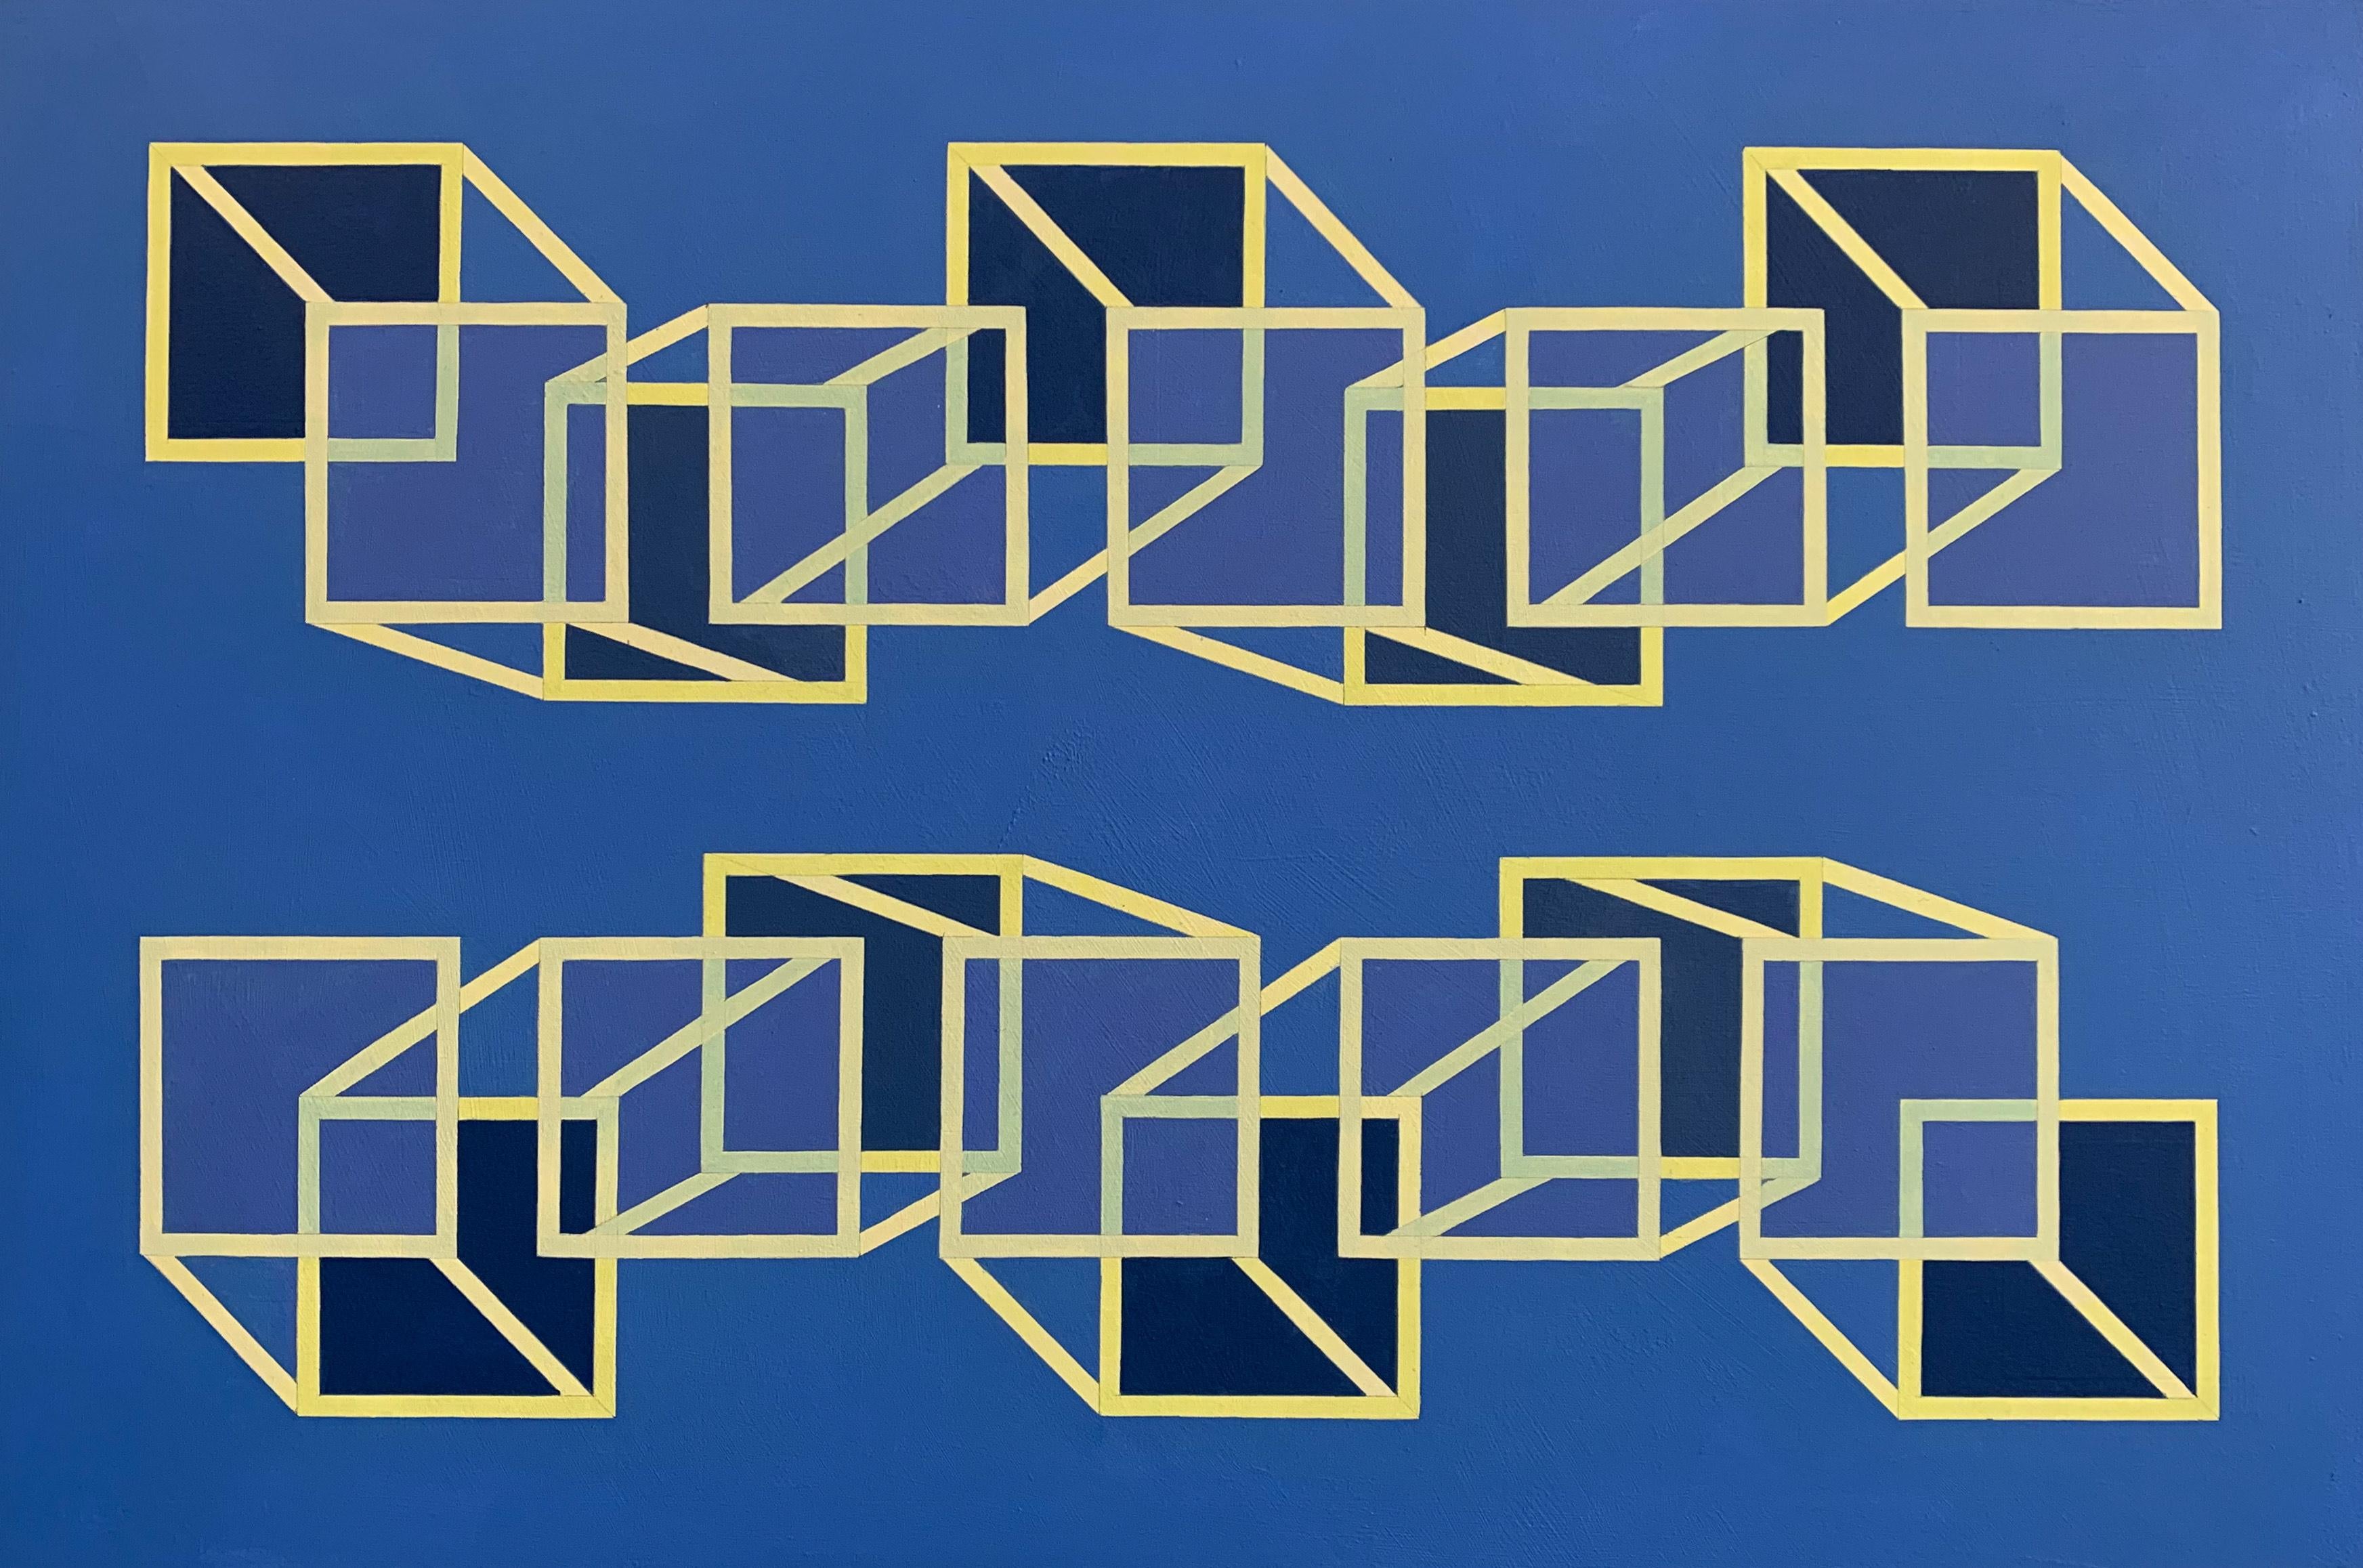 Geometric abstract Op Art painting w/ blue & yellow-gold cubes & squares